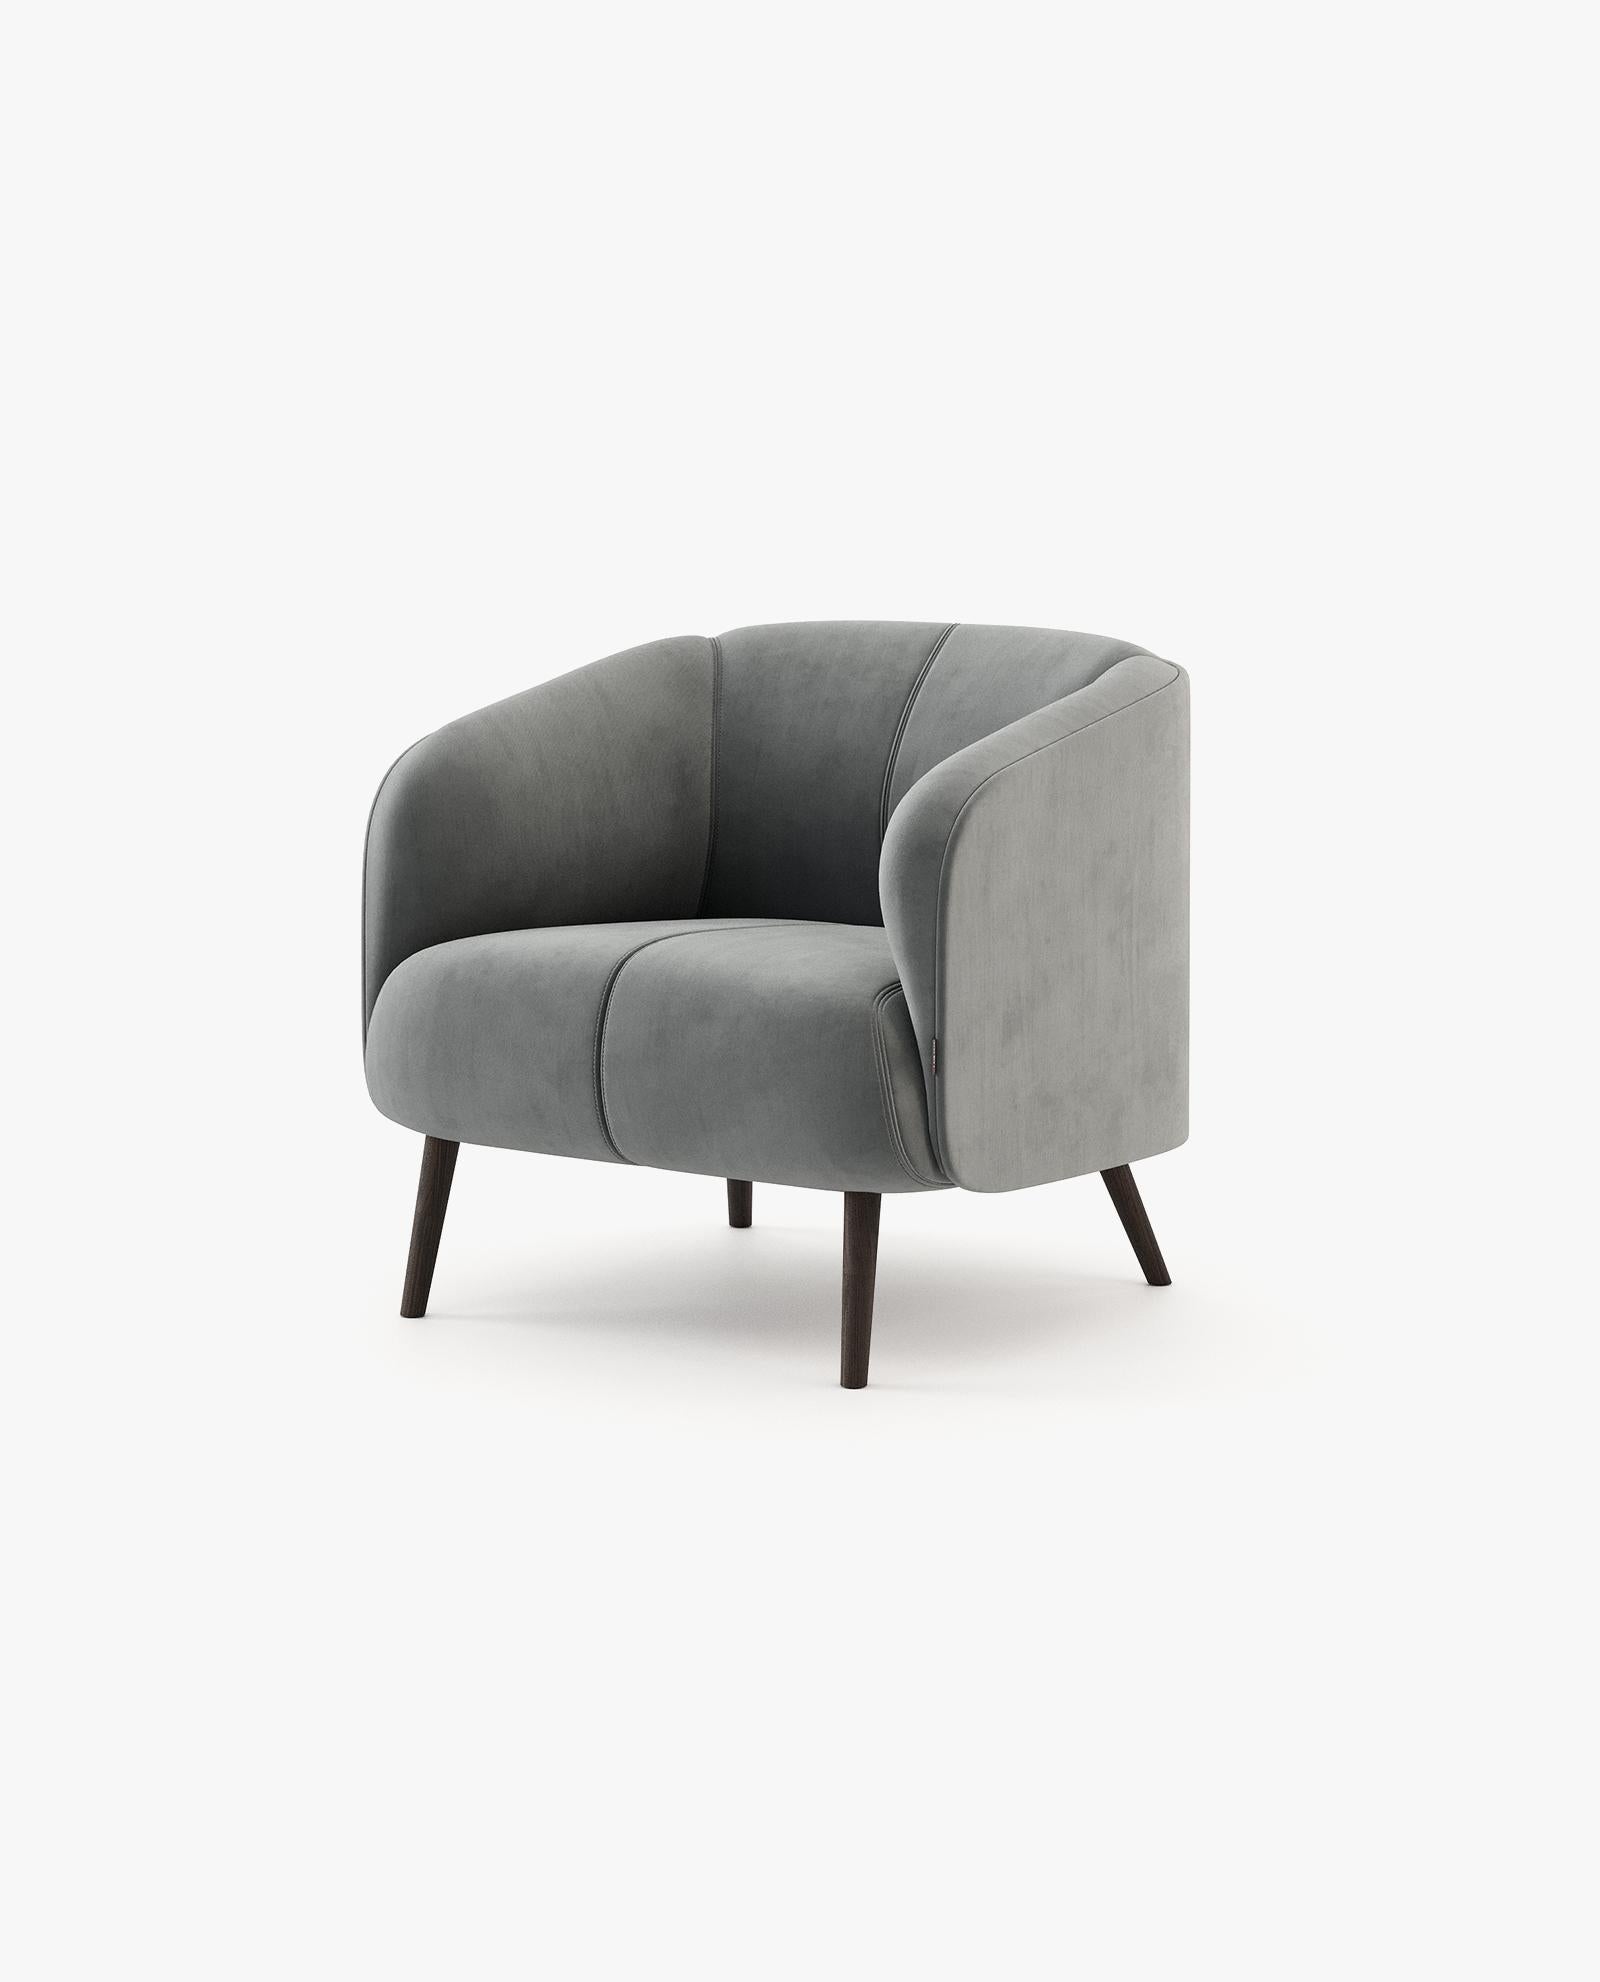 Amalfi armchair is an accent armchair that offers comfort and support while being super stylish, making it the ideal addition to any room. Finished in a soft fabric, this armchair is both comfy and stylish. Available in multiple fabrics, you'll be